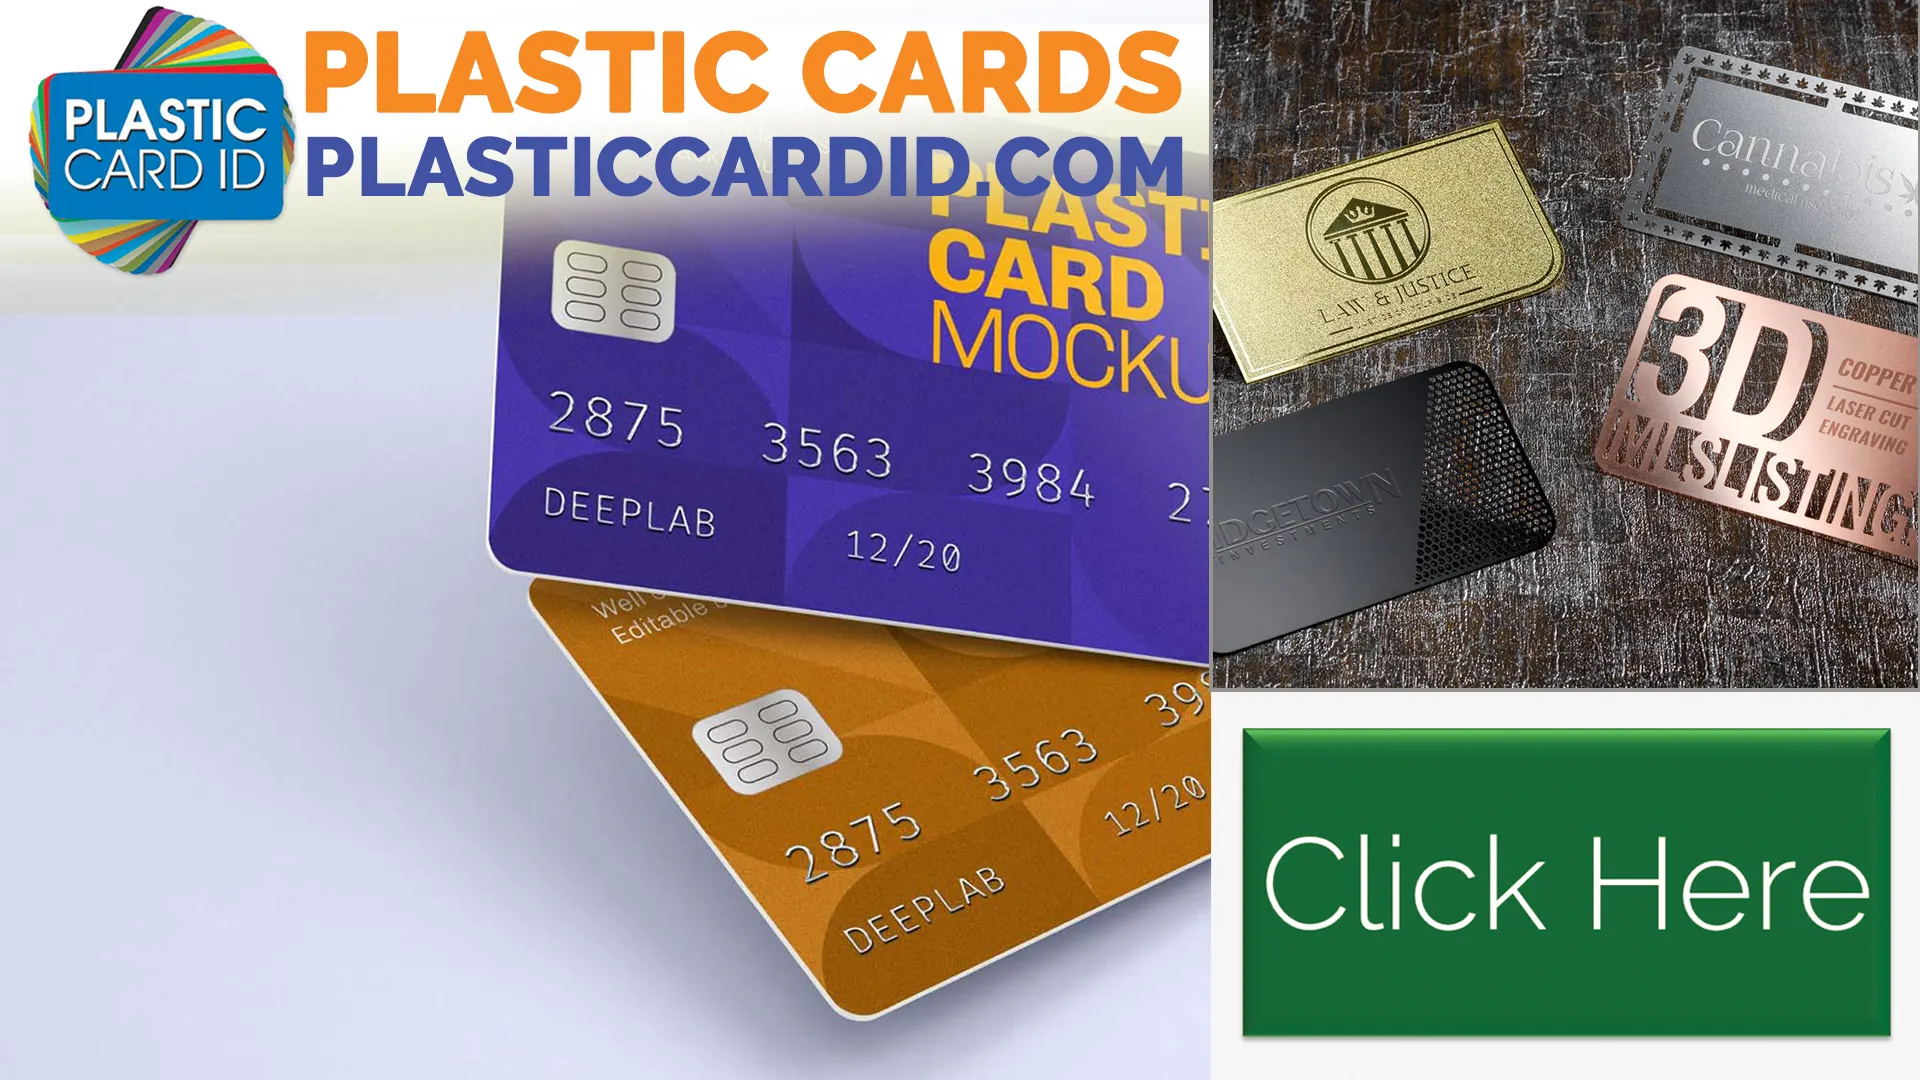 Welcome to the World of Innovative Event Marketing with Plastic Cards!